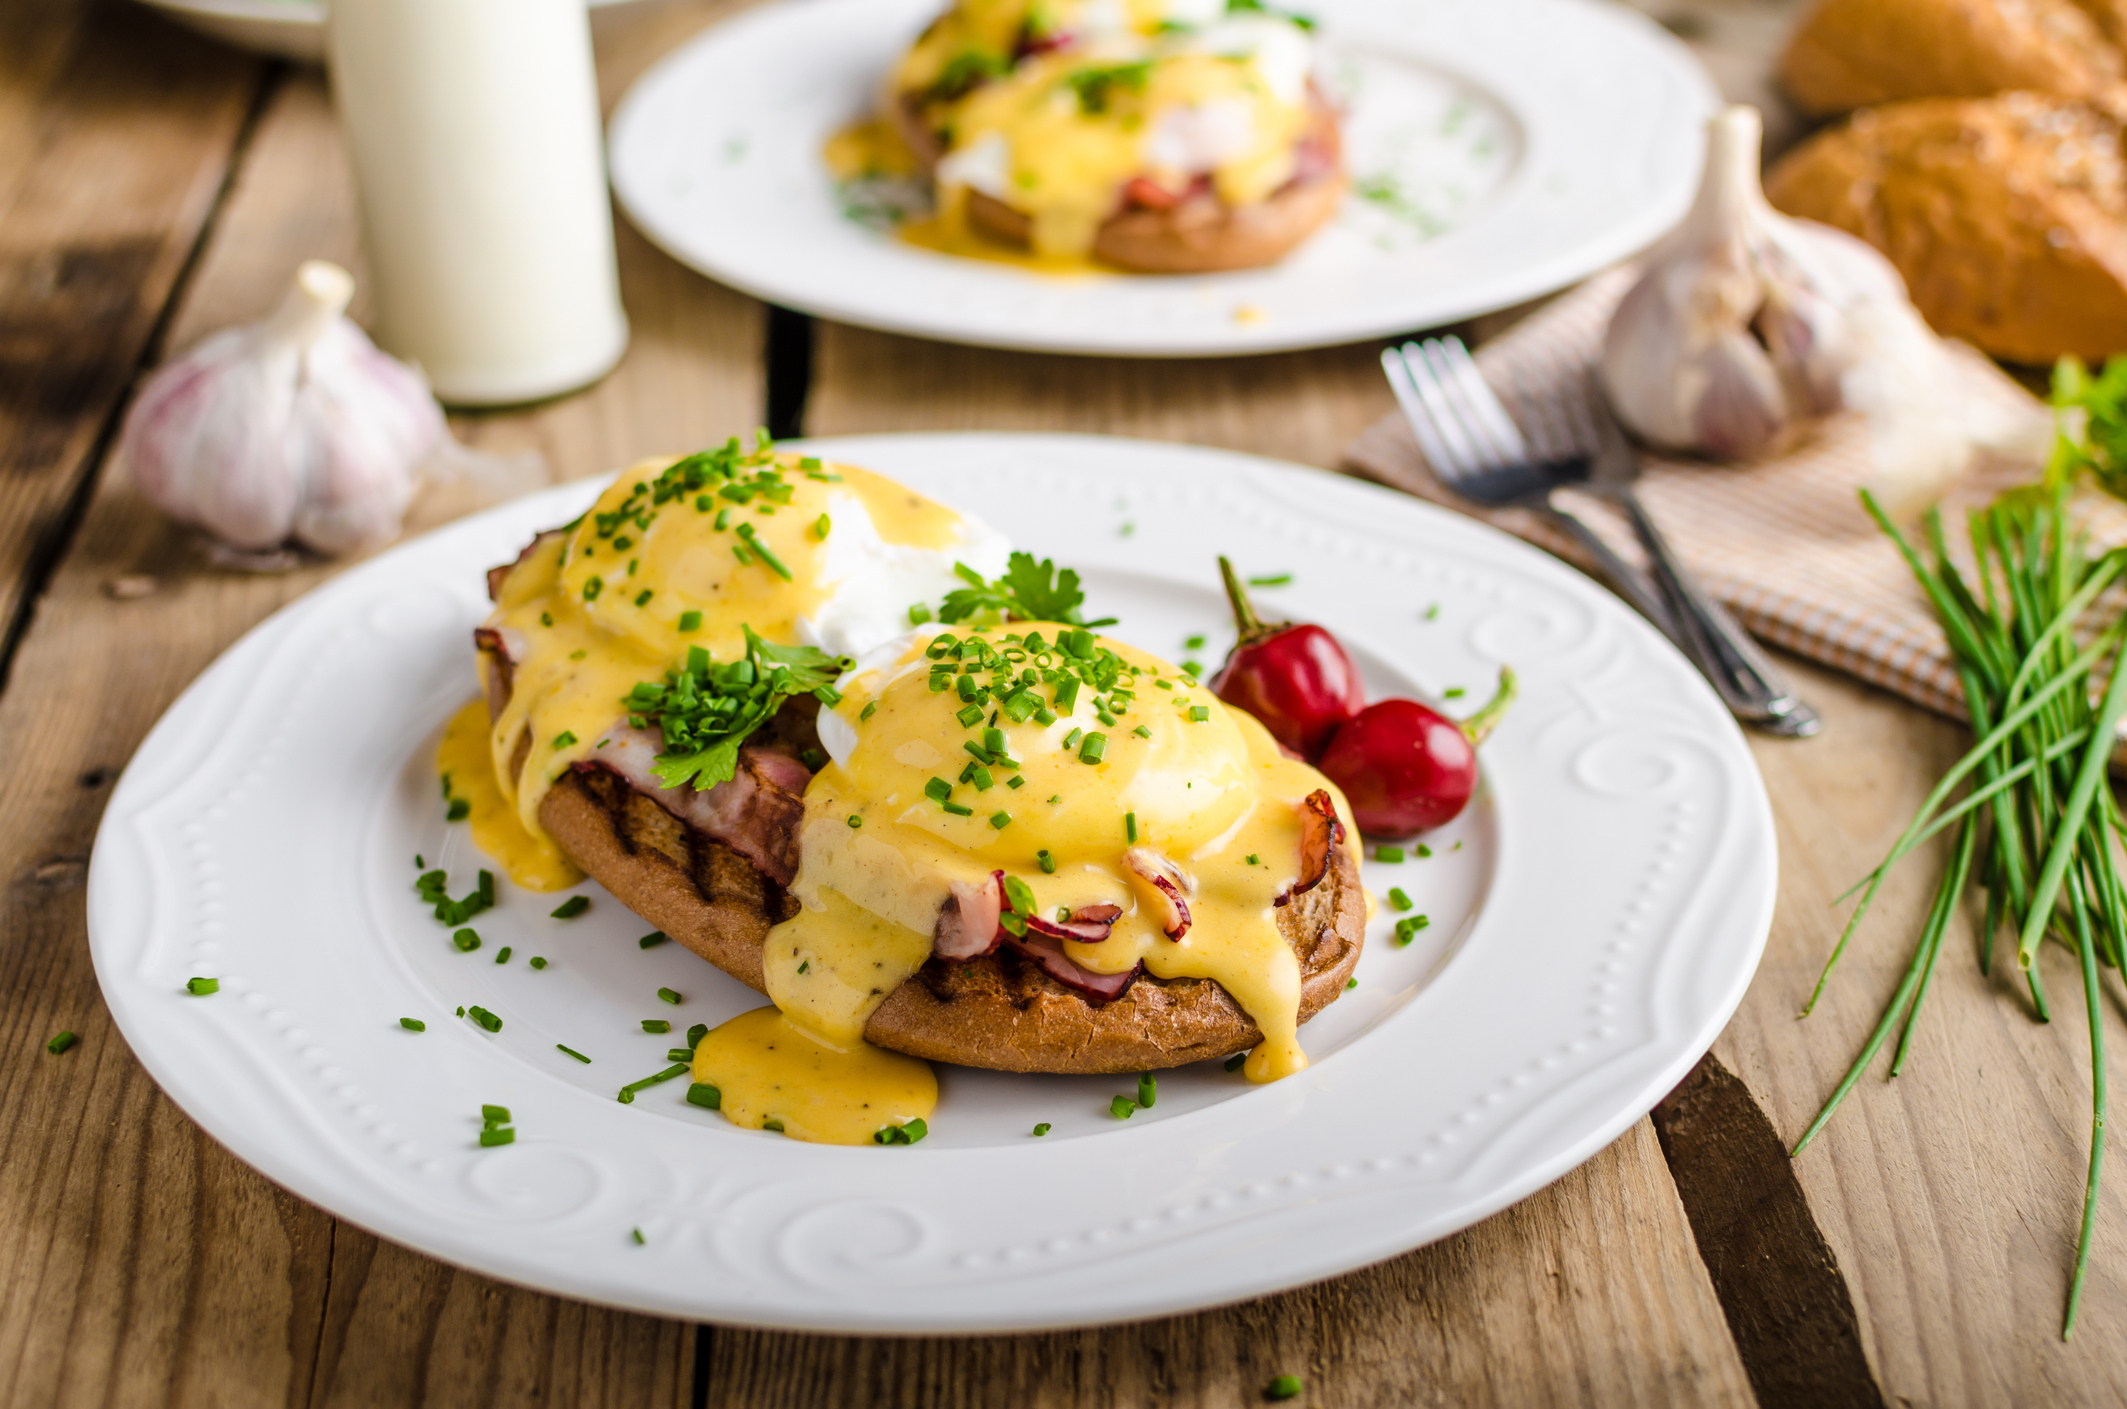 Plate with eggs Benedict and hollandaise sauce, garnished with herbs on a wooden table